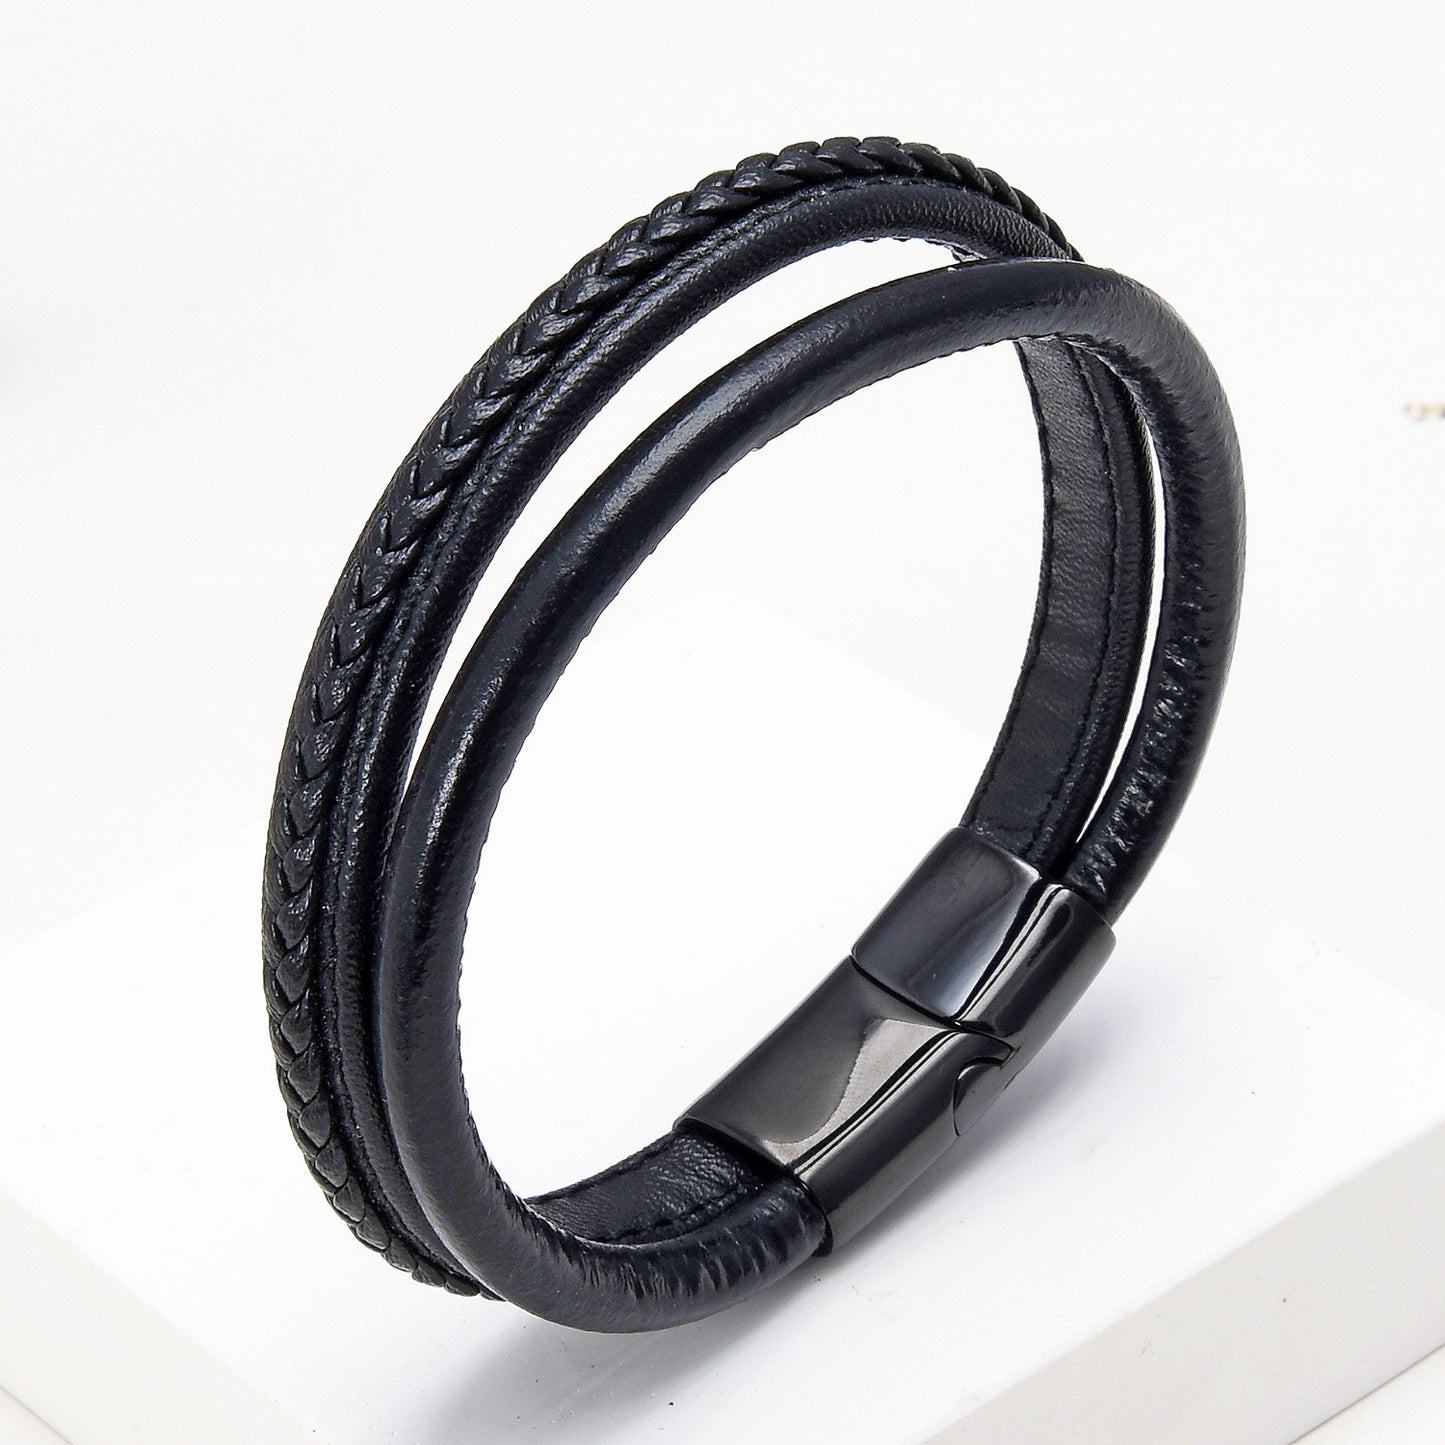 "Braided Genuine Leather Bracelet: A Symbol of Unity and Strength" - The Nile 